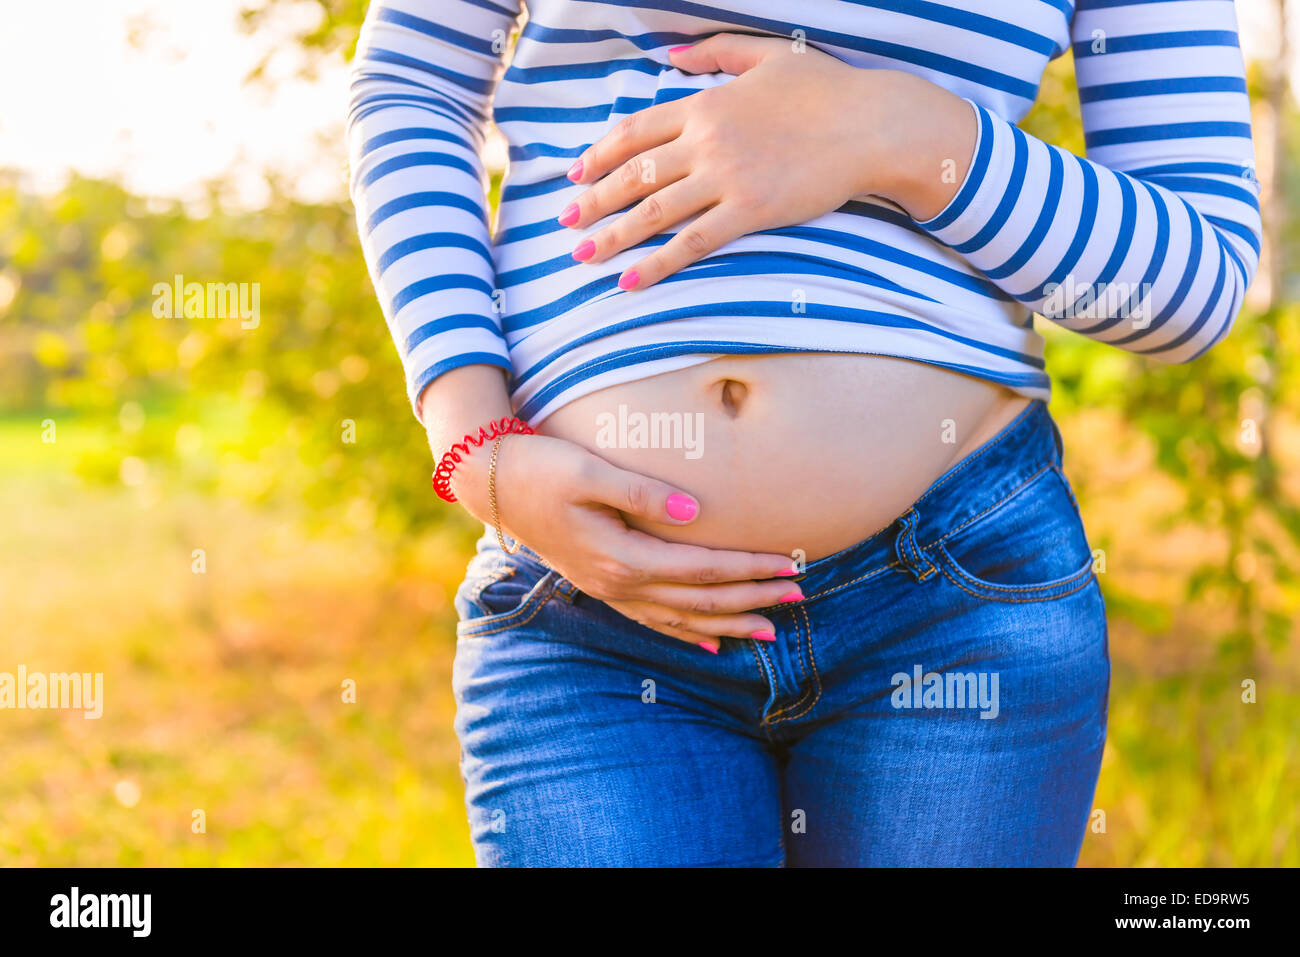 growing belly expectant mother closeup shot Stock Photo